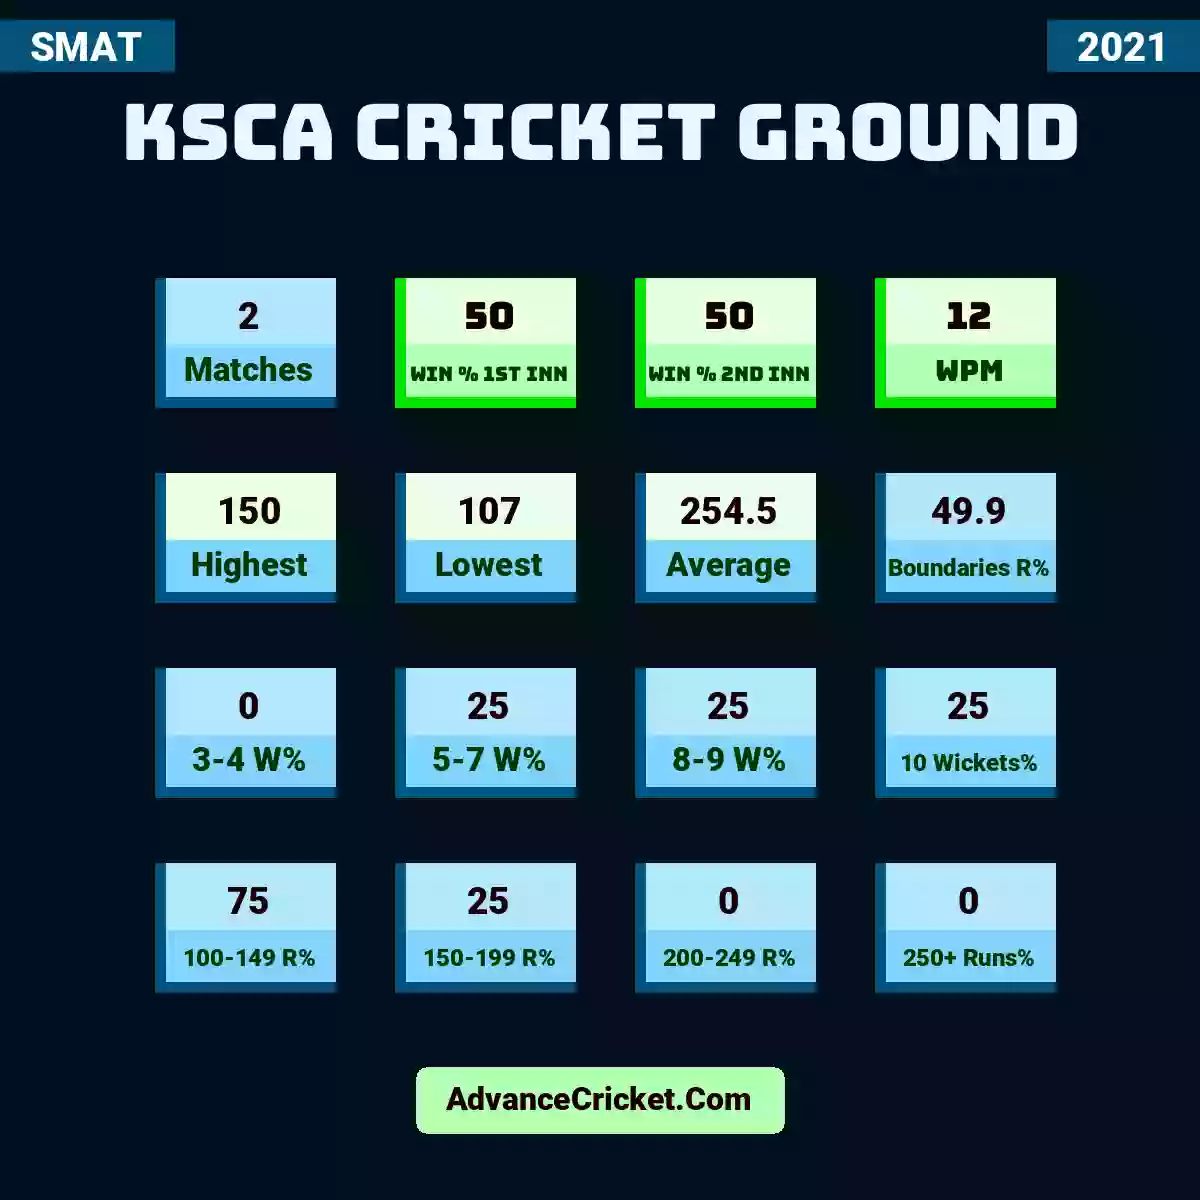 Image showing KSCA Cricket Ground with Matches: 2, Win % 1st Inn: 50, Win % 2nd Inn: 50, WPM: 12, Highest: 150, Lowest: 107, Average: 254.5, Boundaries R%: 49.9, 3-4 W%: 0, 5-7 W%: 25, 8-9 W%: 25, 10 Wickets%: 25, 100-149 R%: 75, 150-199 R%: 25, 200-249 R%: 0, 250+ Runs%: 0.